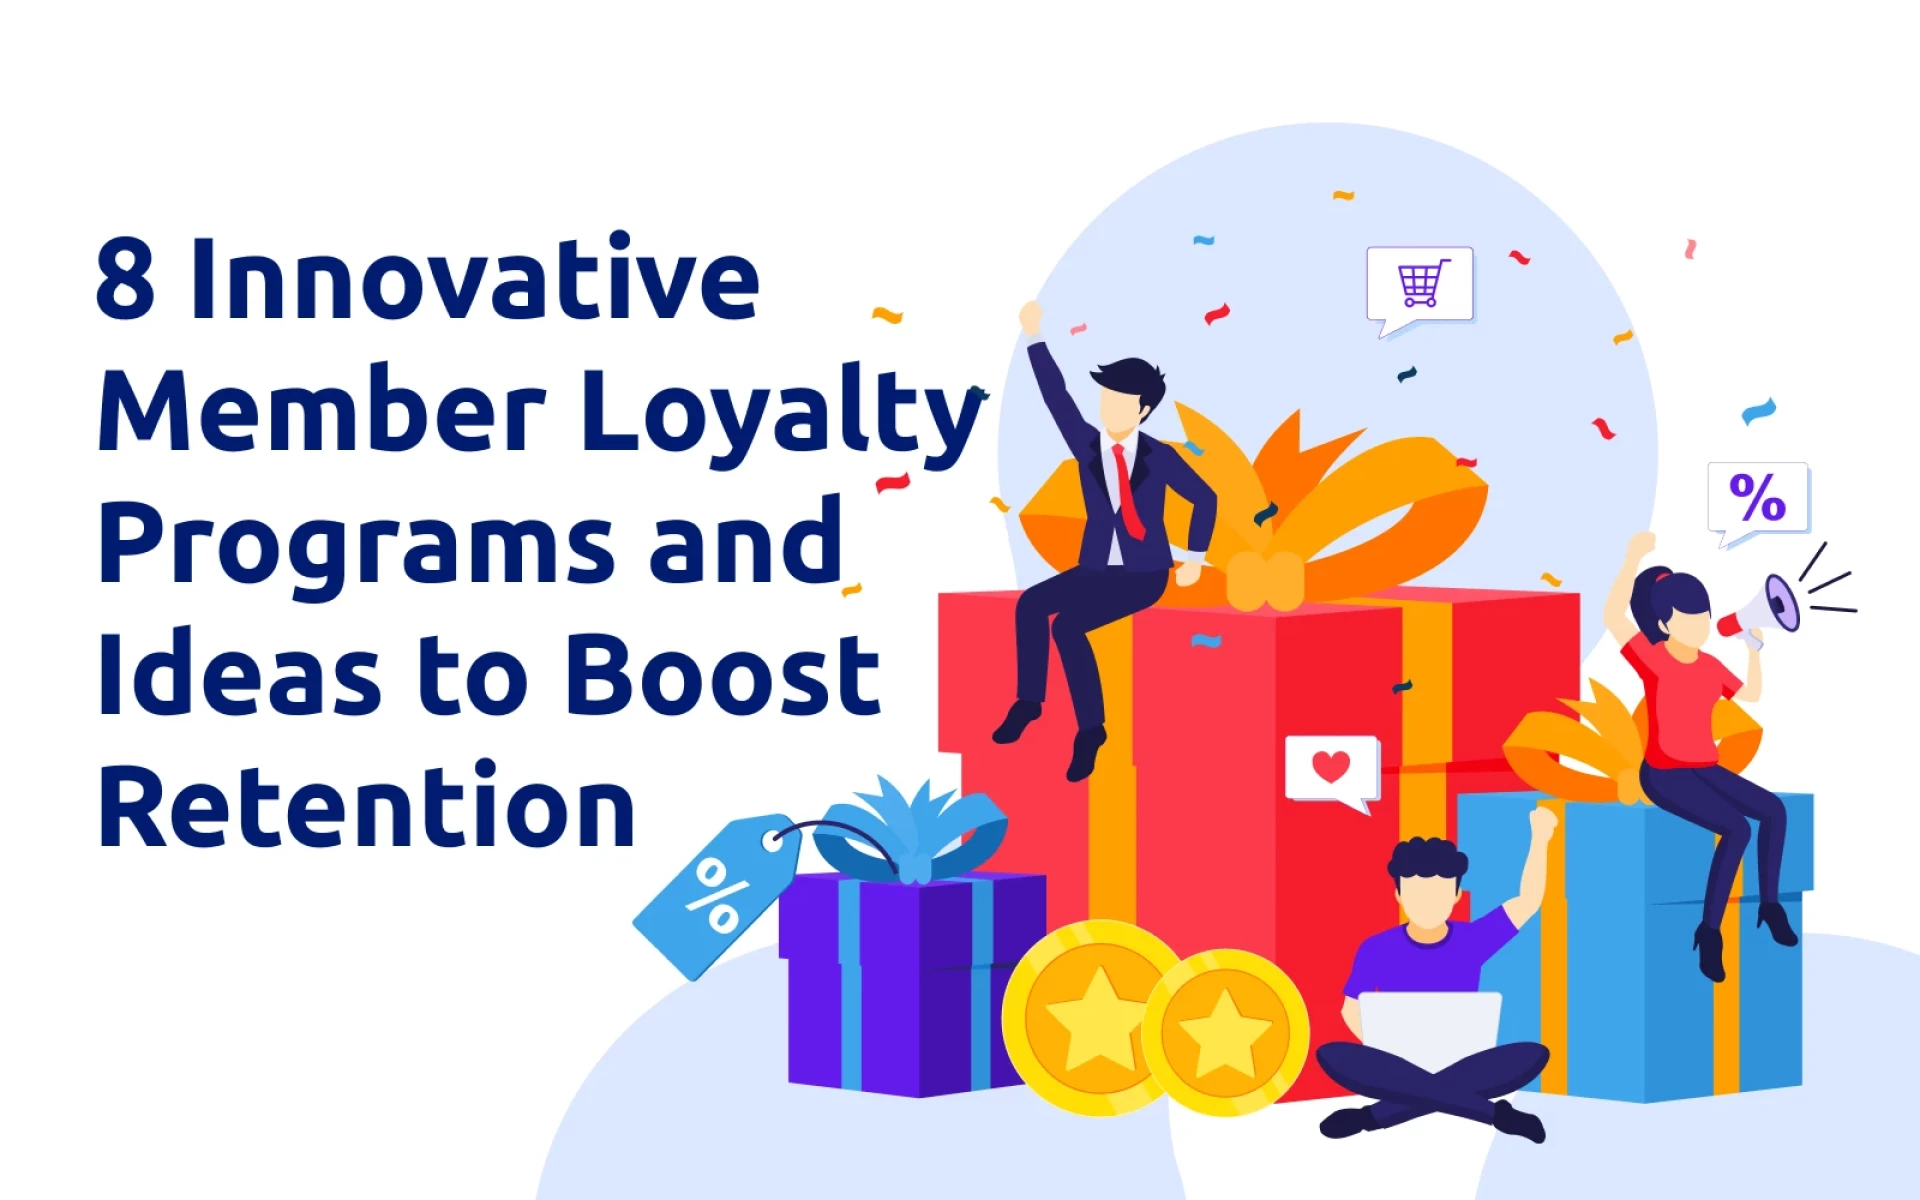 8-innovative-member-loyalty-programs-and-ideas-to-boost-retention-with